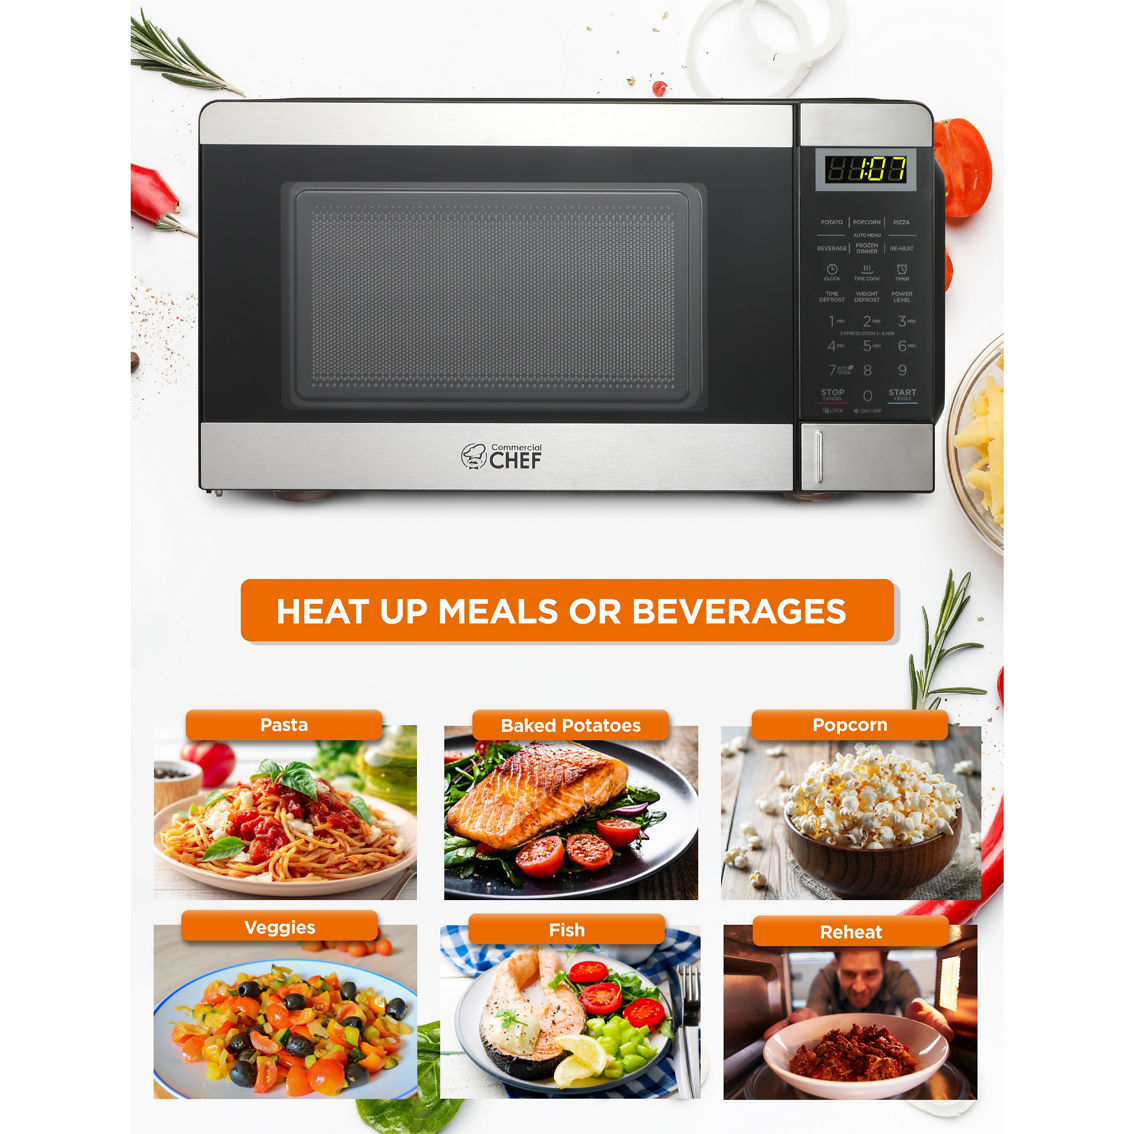 Commercial Chef .7 cu. ft. Counter Top Microwave - Image 2 of 7